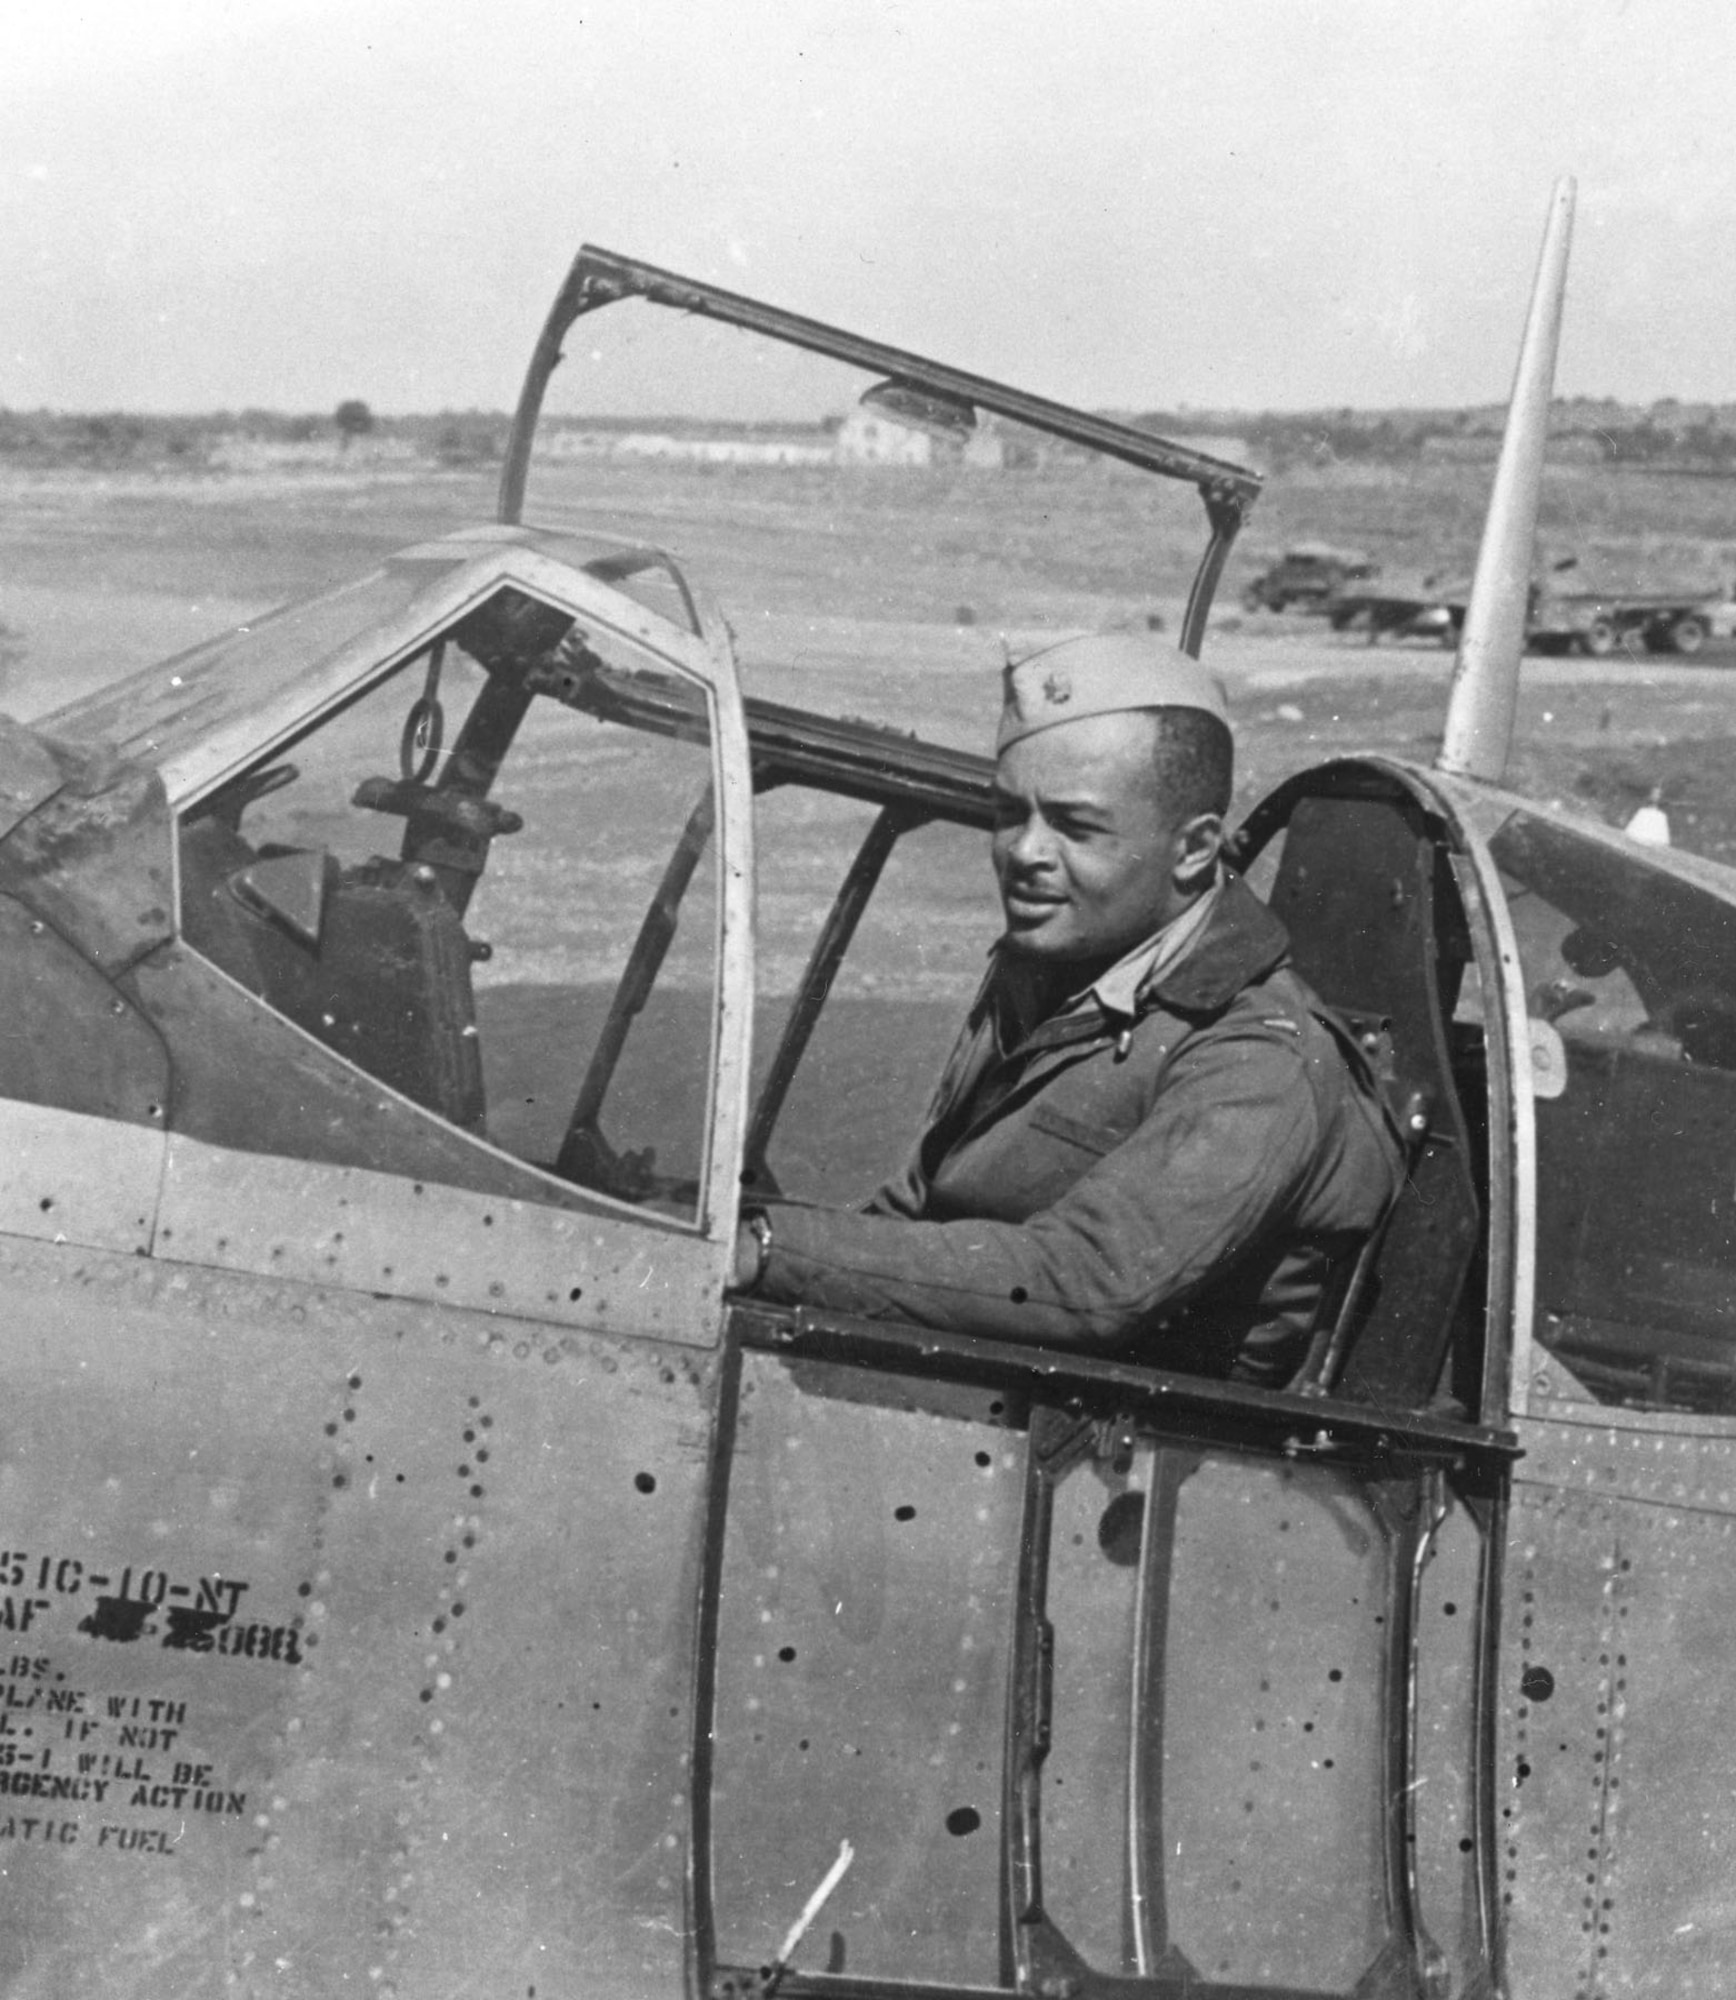 Maj. George S. “Spanky” Roberts at the controls of a P-51 Mustang. Roberts was the first African American accepted for U.S. Army pilot training. He later commanded the 99th Fighter Squadron and the 332nd Fighter Group. (U.S. Air Force photo)